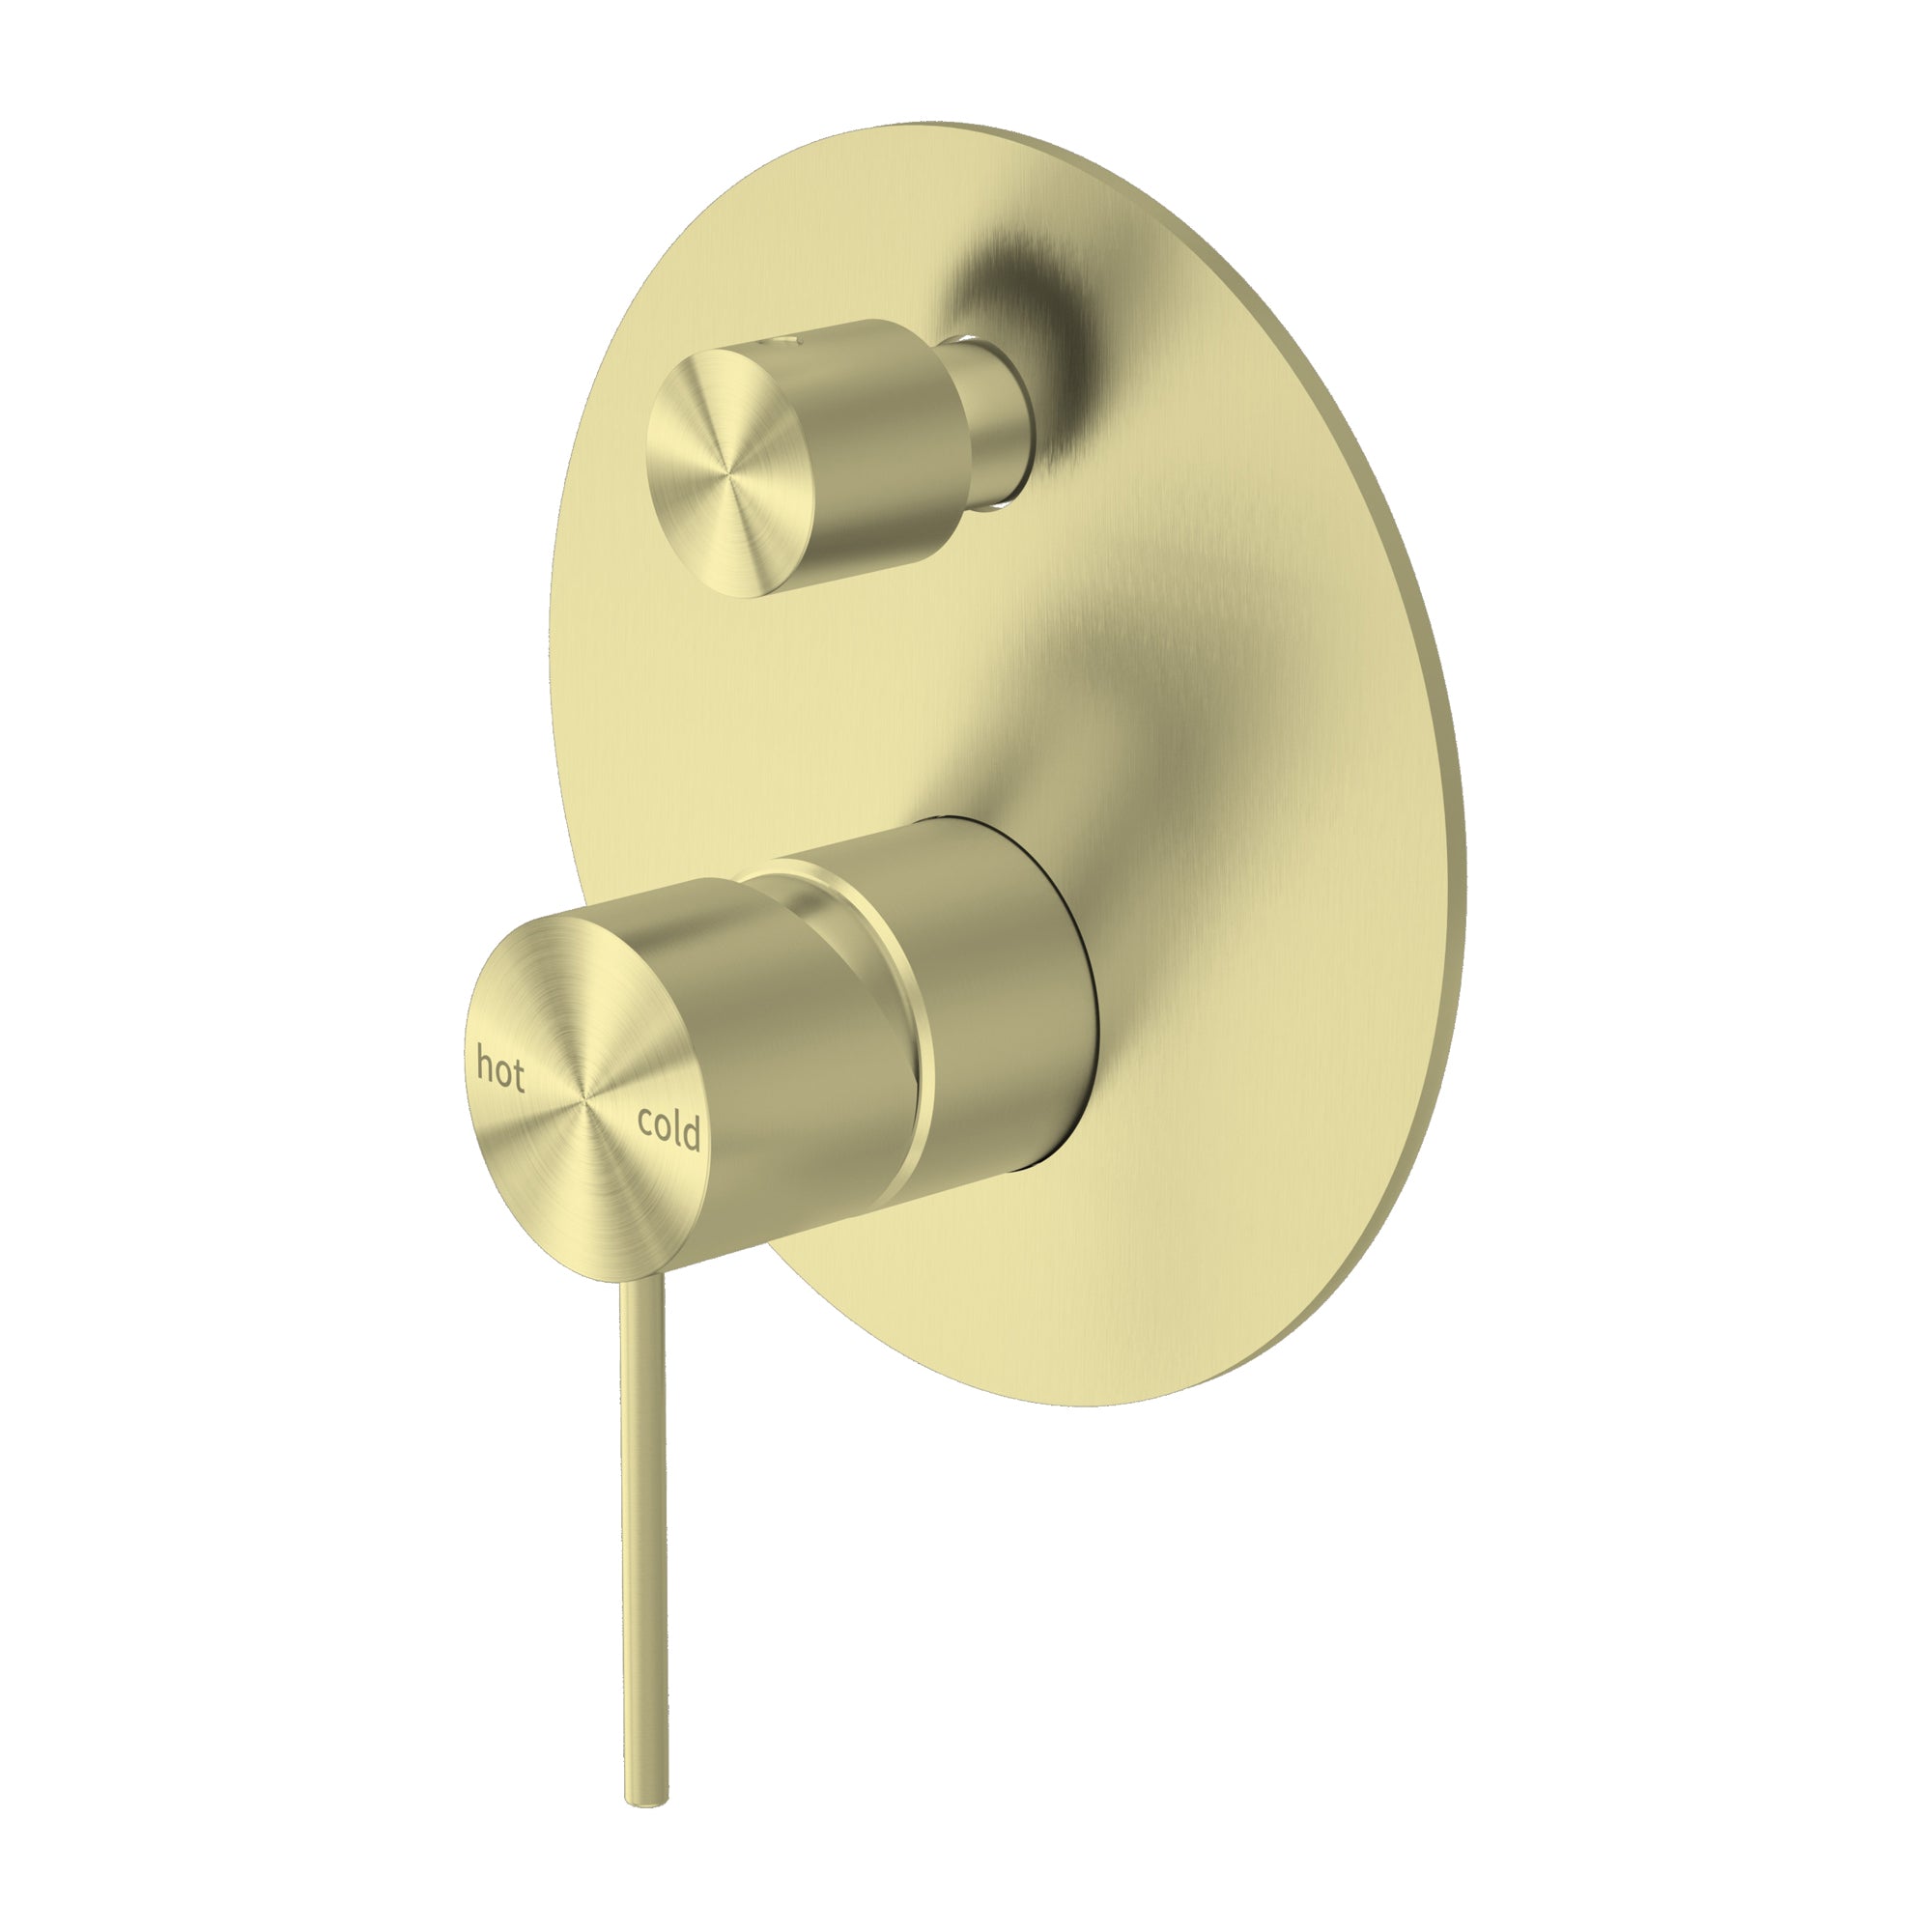 Mecca Shower Mixer With Divertor Brushed Gold - NR221911ABG